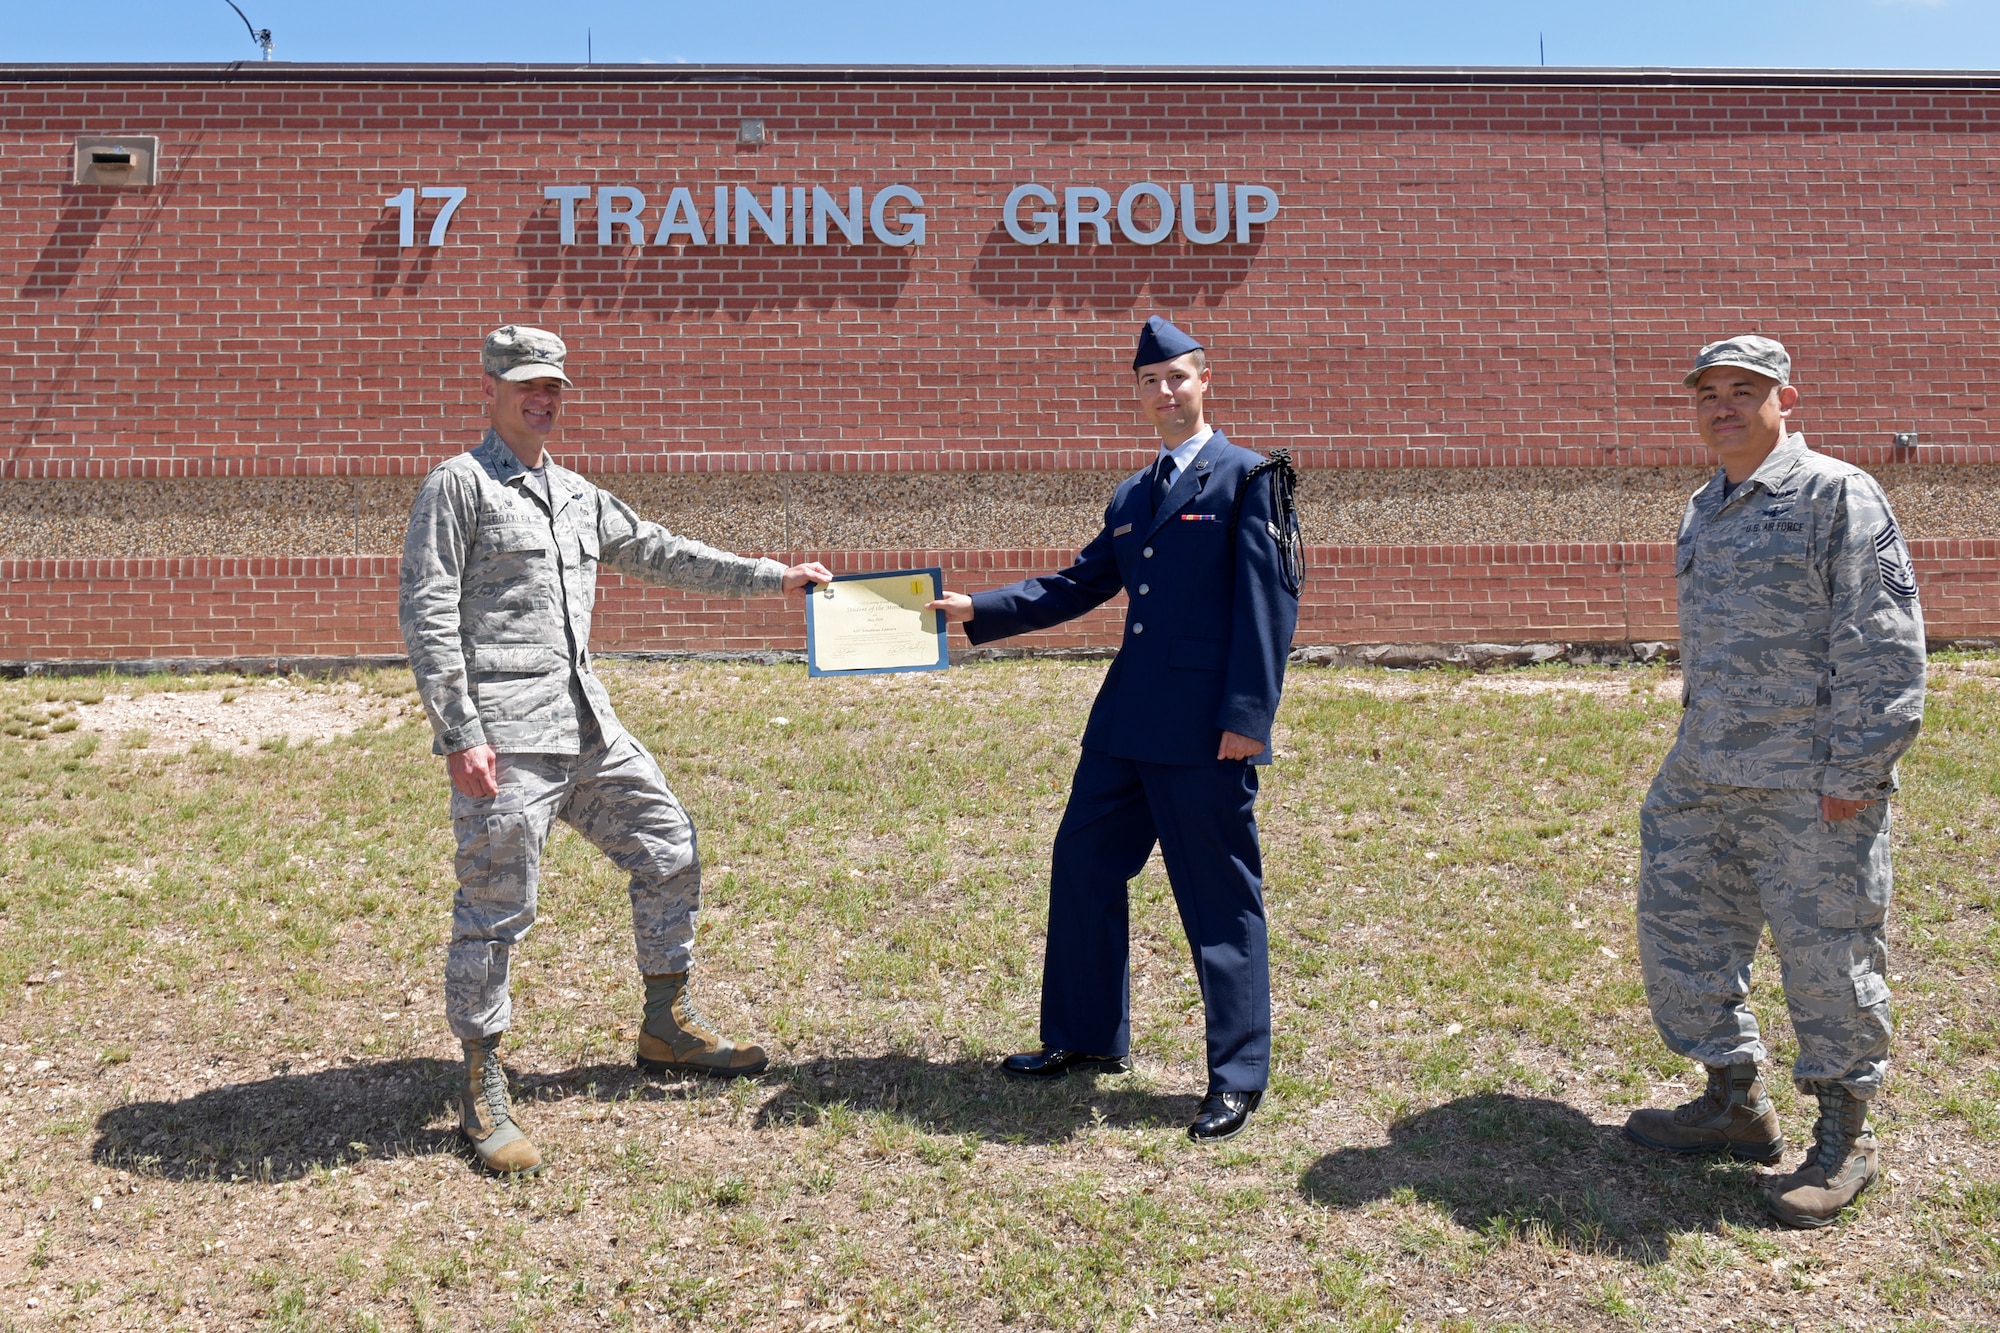 U.S. Air Force Col. Thomas Coakley, 17th Training Group commander, presents the 316th Training Squadron Student of the Month award to Airman 1st Class Jonathan Zamora, 316th TRS student, at Brandenburg Hall on Goodfellow Air Force Base, Texas, June 5, 2020. The 316th TRS’ mission is to conduct U.S. Air Force, U.S. Army, U.S. Marine Corps, U.S. Navy and U.S. Coast Guard cryptologic, human intelligence and military training. (U.S. Air Force photo by Senior Airman Zachary Chapman)